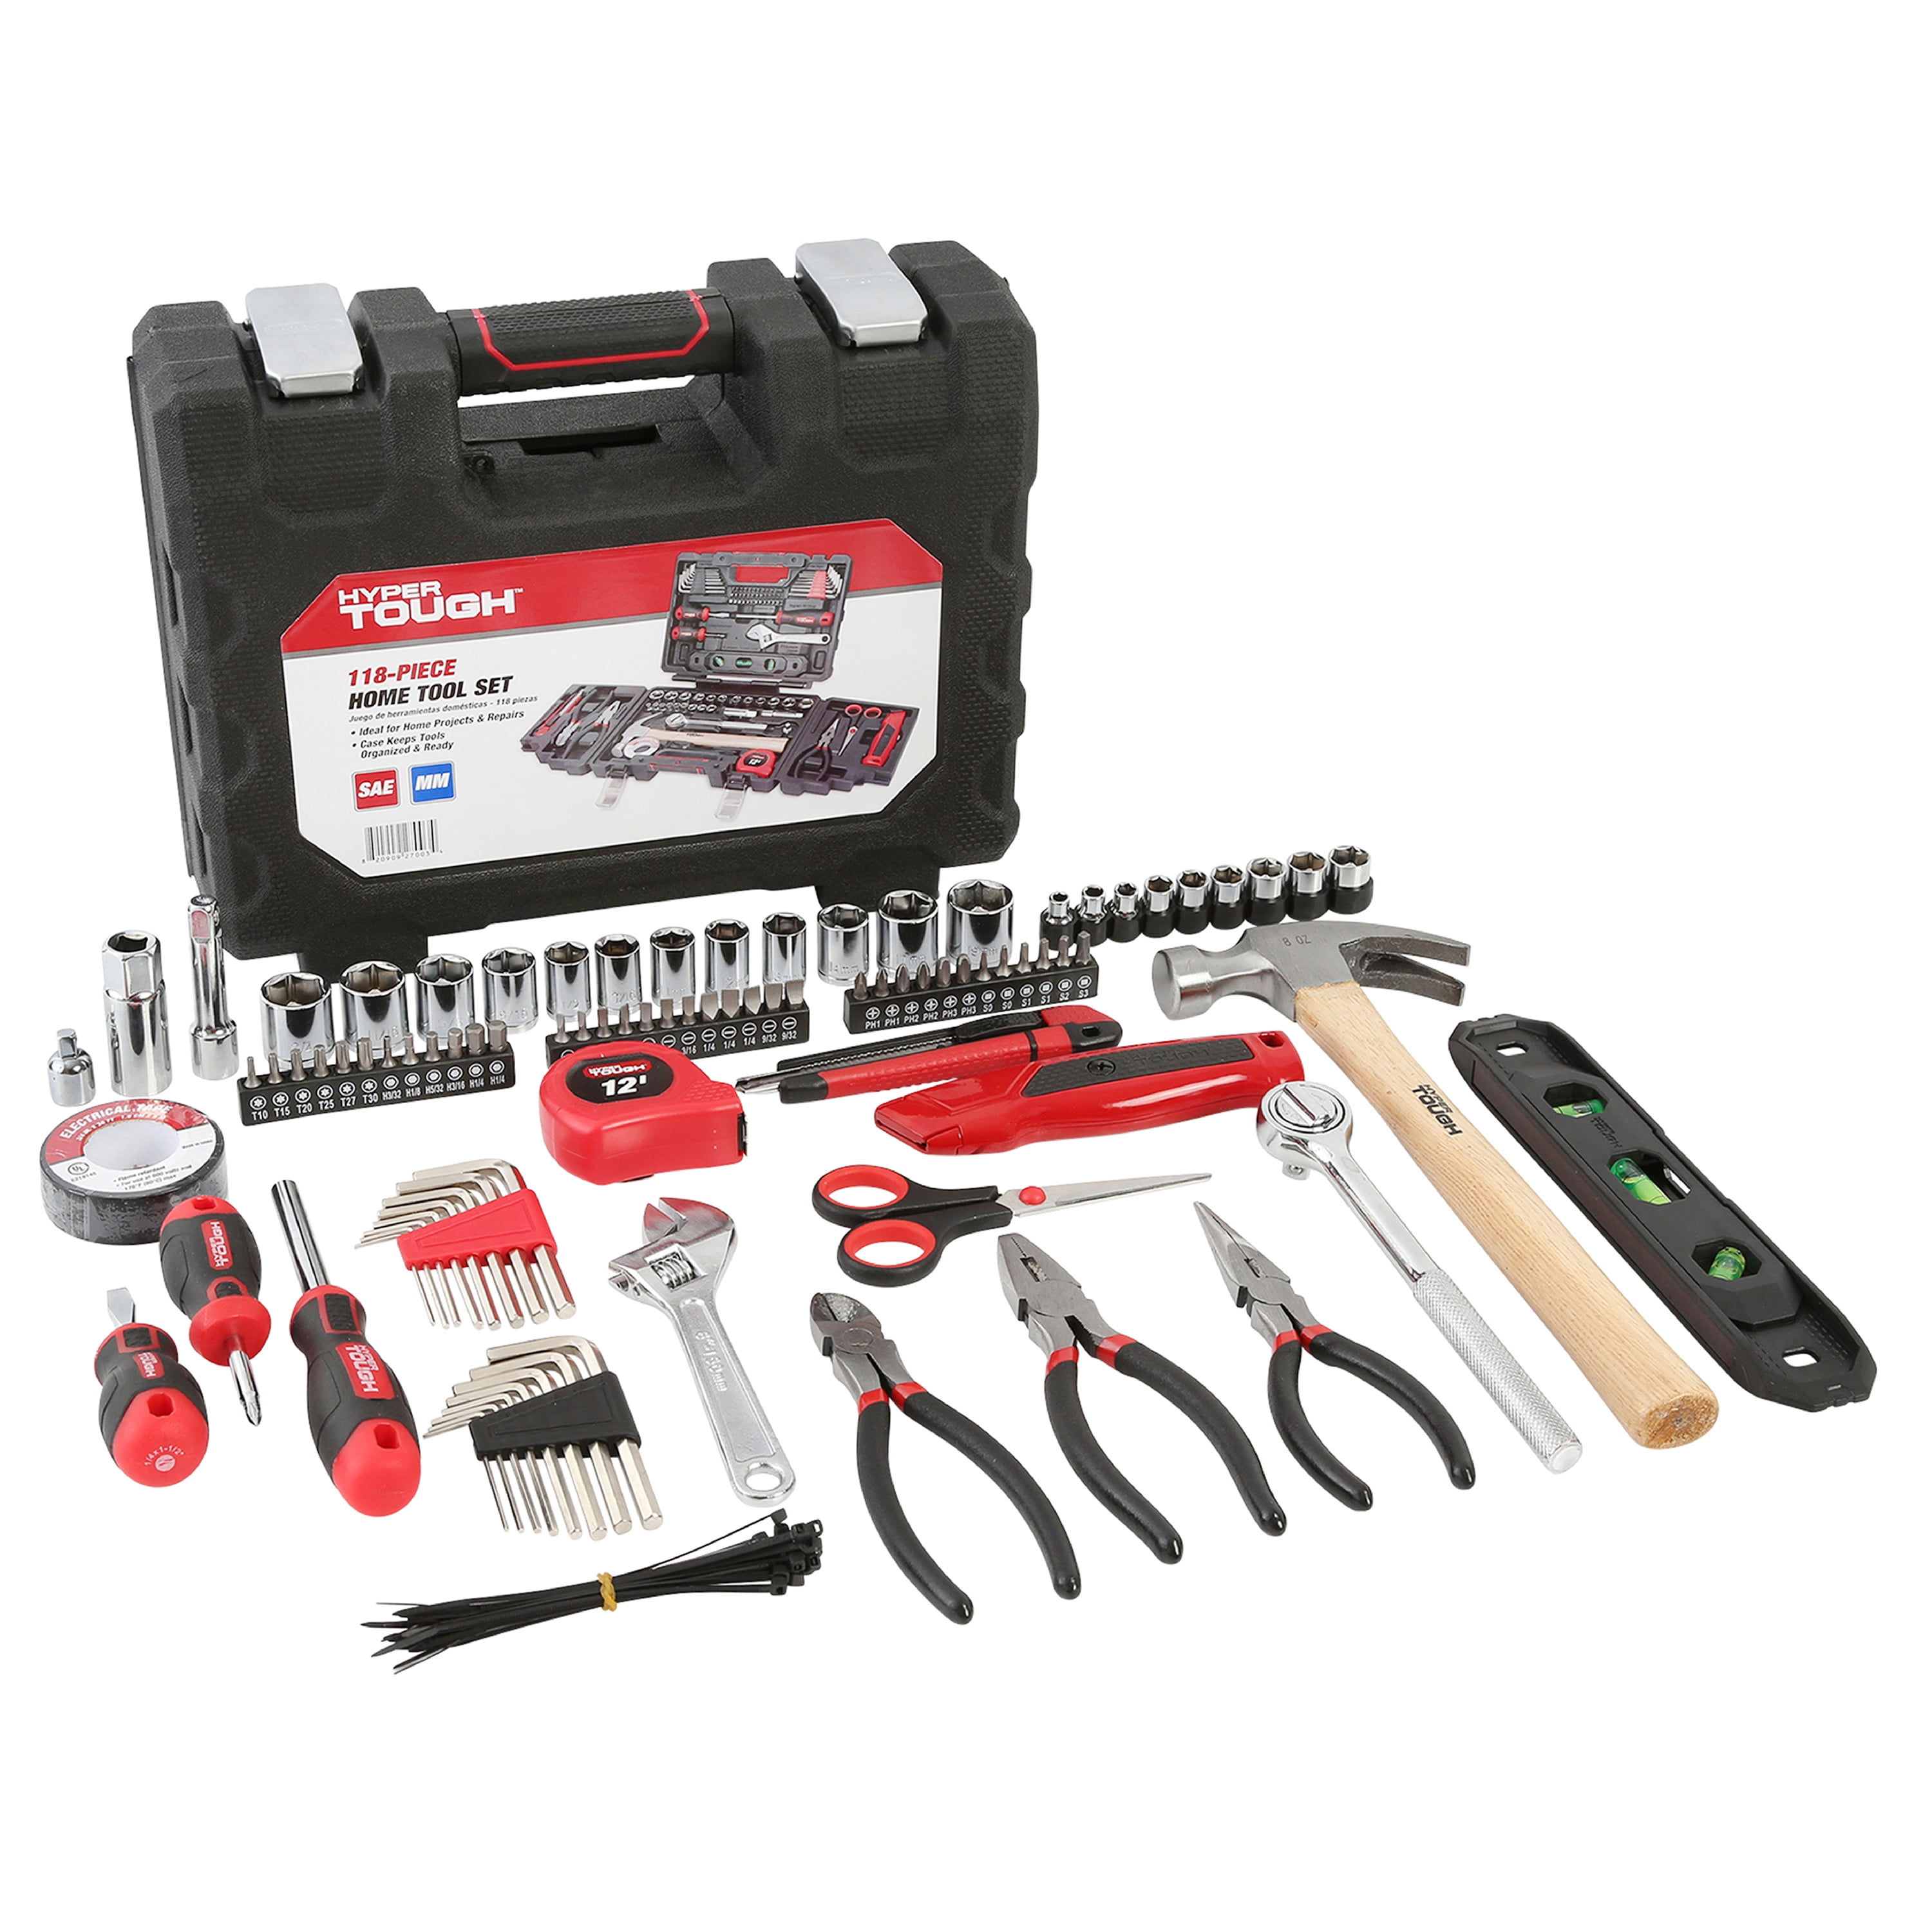 Hyper Tough All Purpose 86pc Hand Tool Set With 3 Drawer Case Home Improvement 